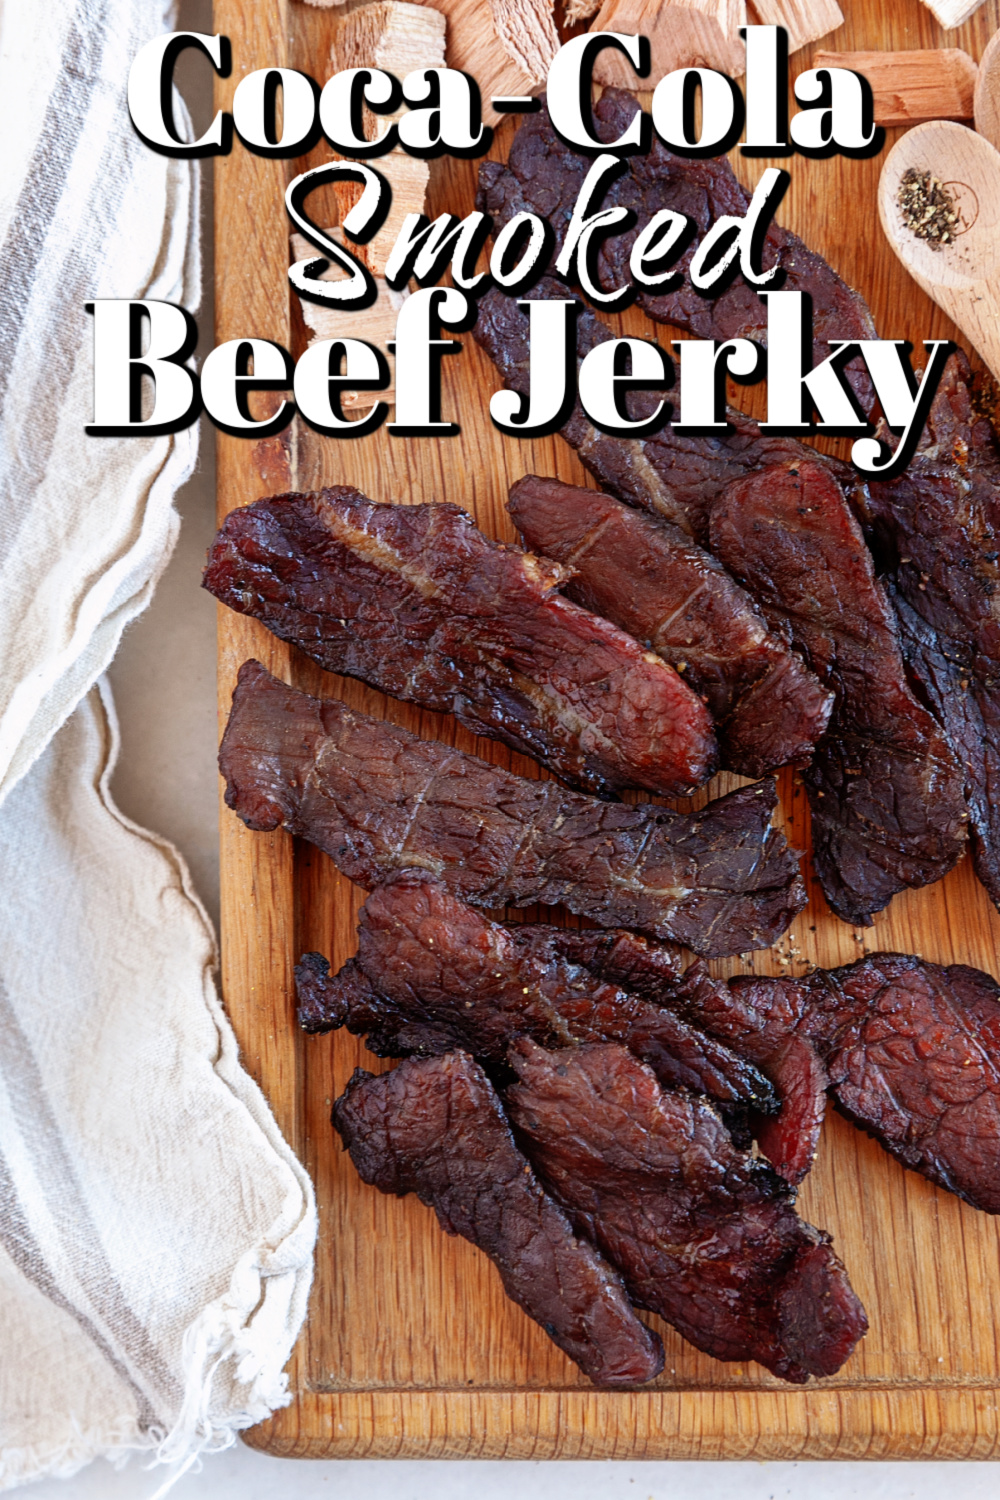 This amazing Coca-Cola smoked beef jerky is incredible, and you would never know it was marinated in Coca-Cola.